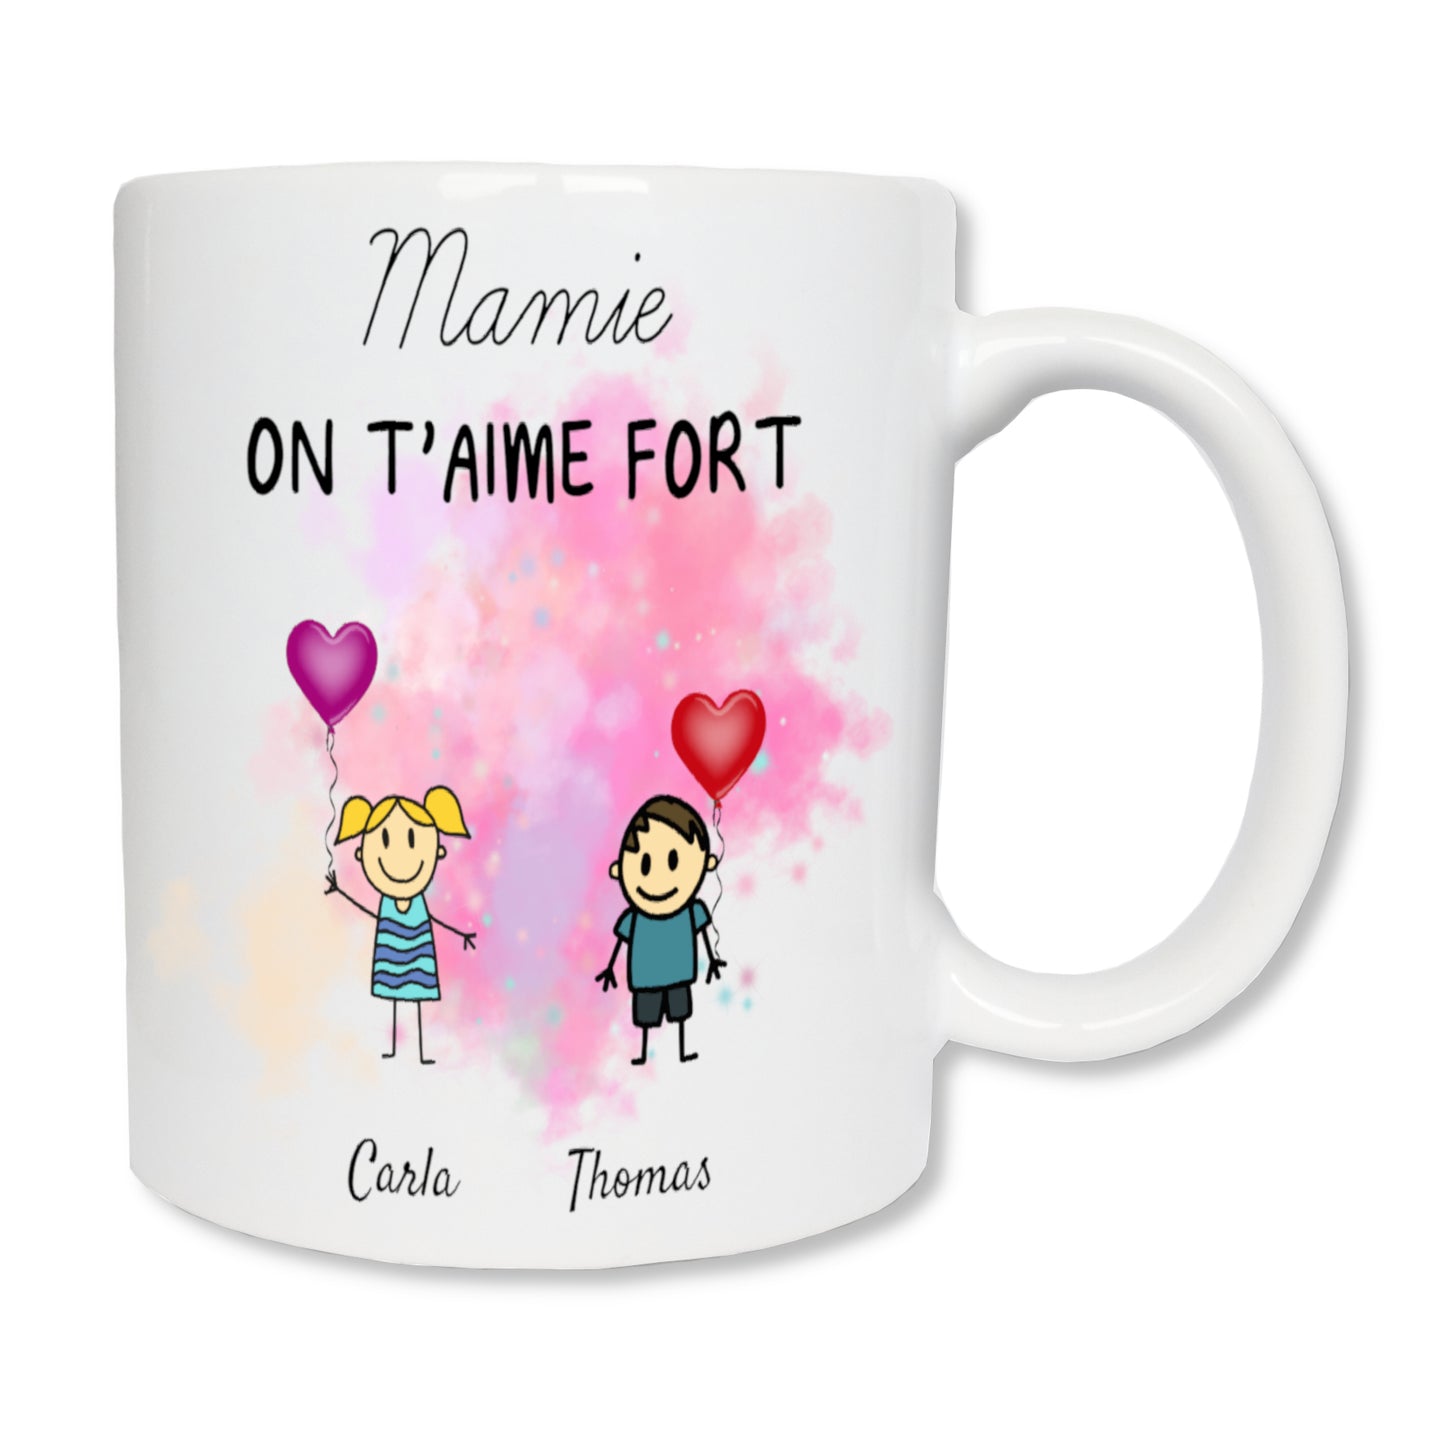 Personalized mug for mom or granny and 2 children